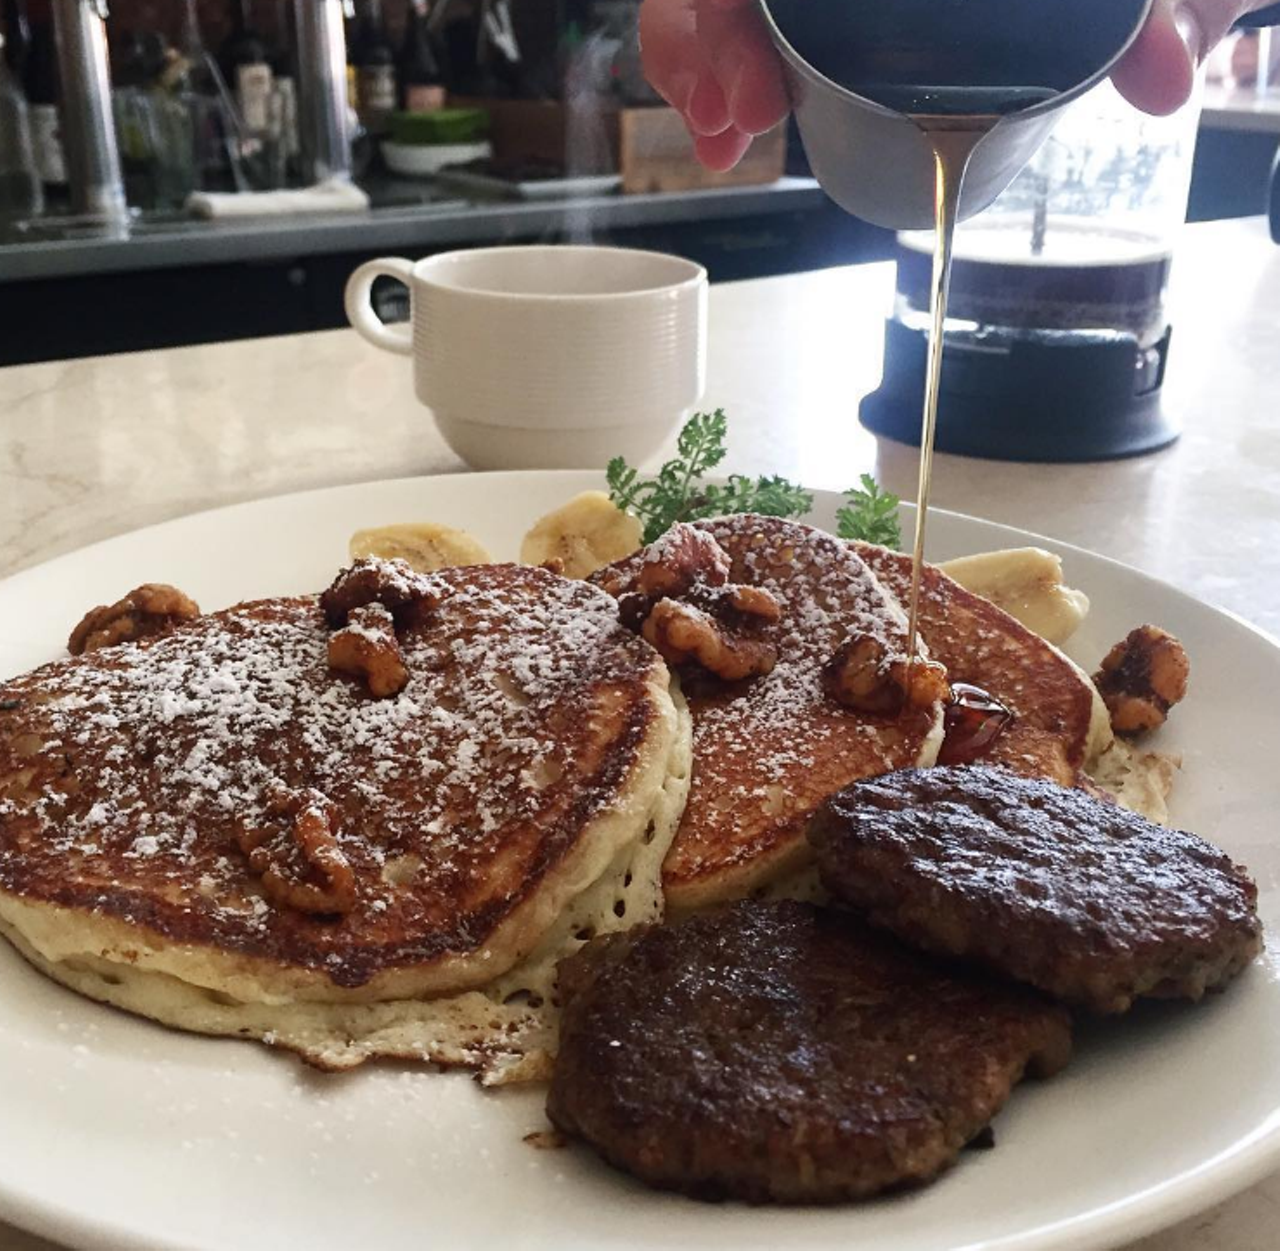 The Strand
807 N. Mills Ave. | 407-920-7744
The Strand makes some of the best brunch around with ingredients from local food partners the Olde Hearth Bread Co. and Wild Ocean Seafood. Some of our favorite dishes here are the creamy ricotta pancakes and savory snapper cakes.
Photo via strandorlando/Instagram